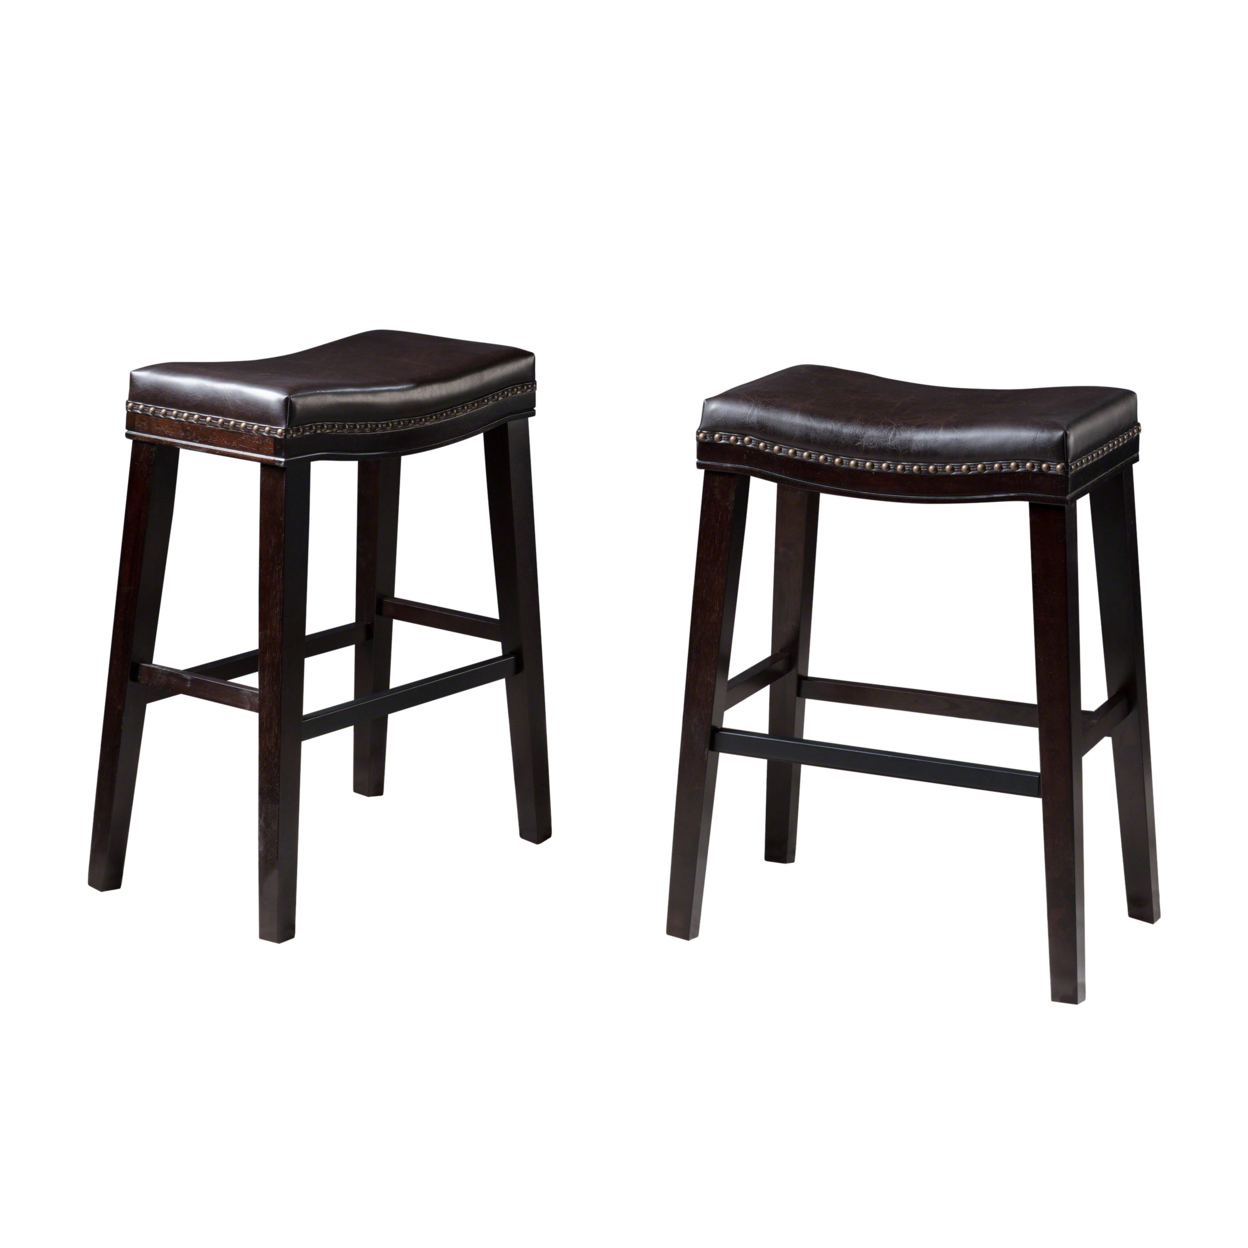 Kainu Contemporary Upholstered Saddle Barstool With Nailhead Trim (Set Of 2) - Brown